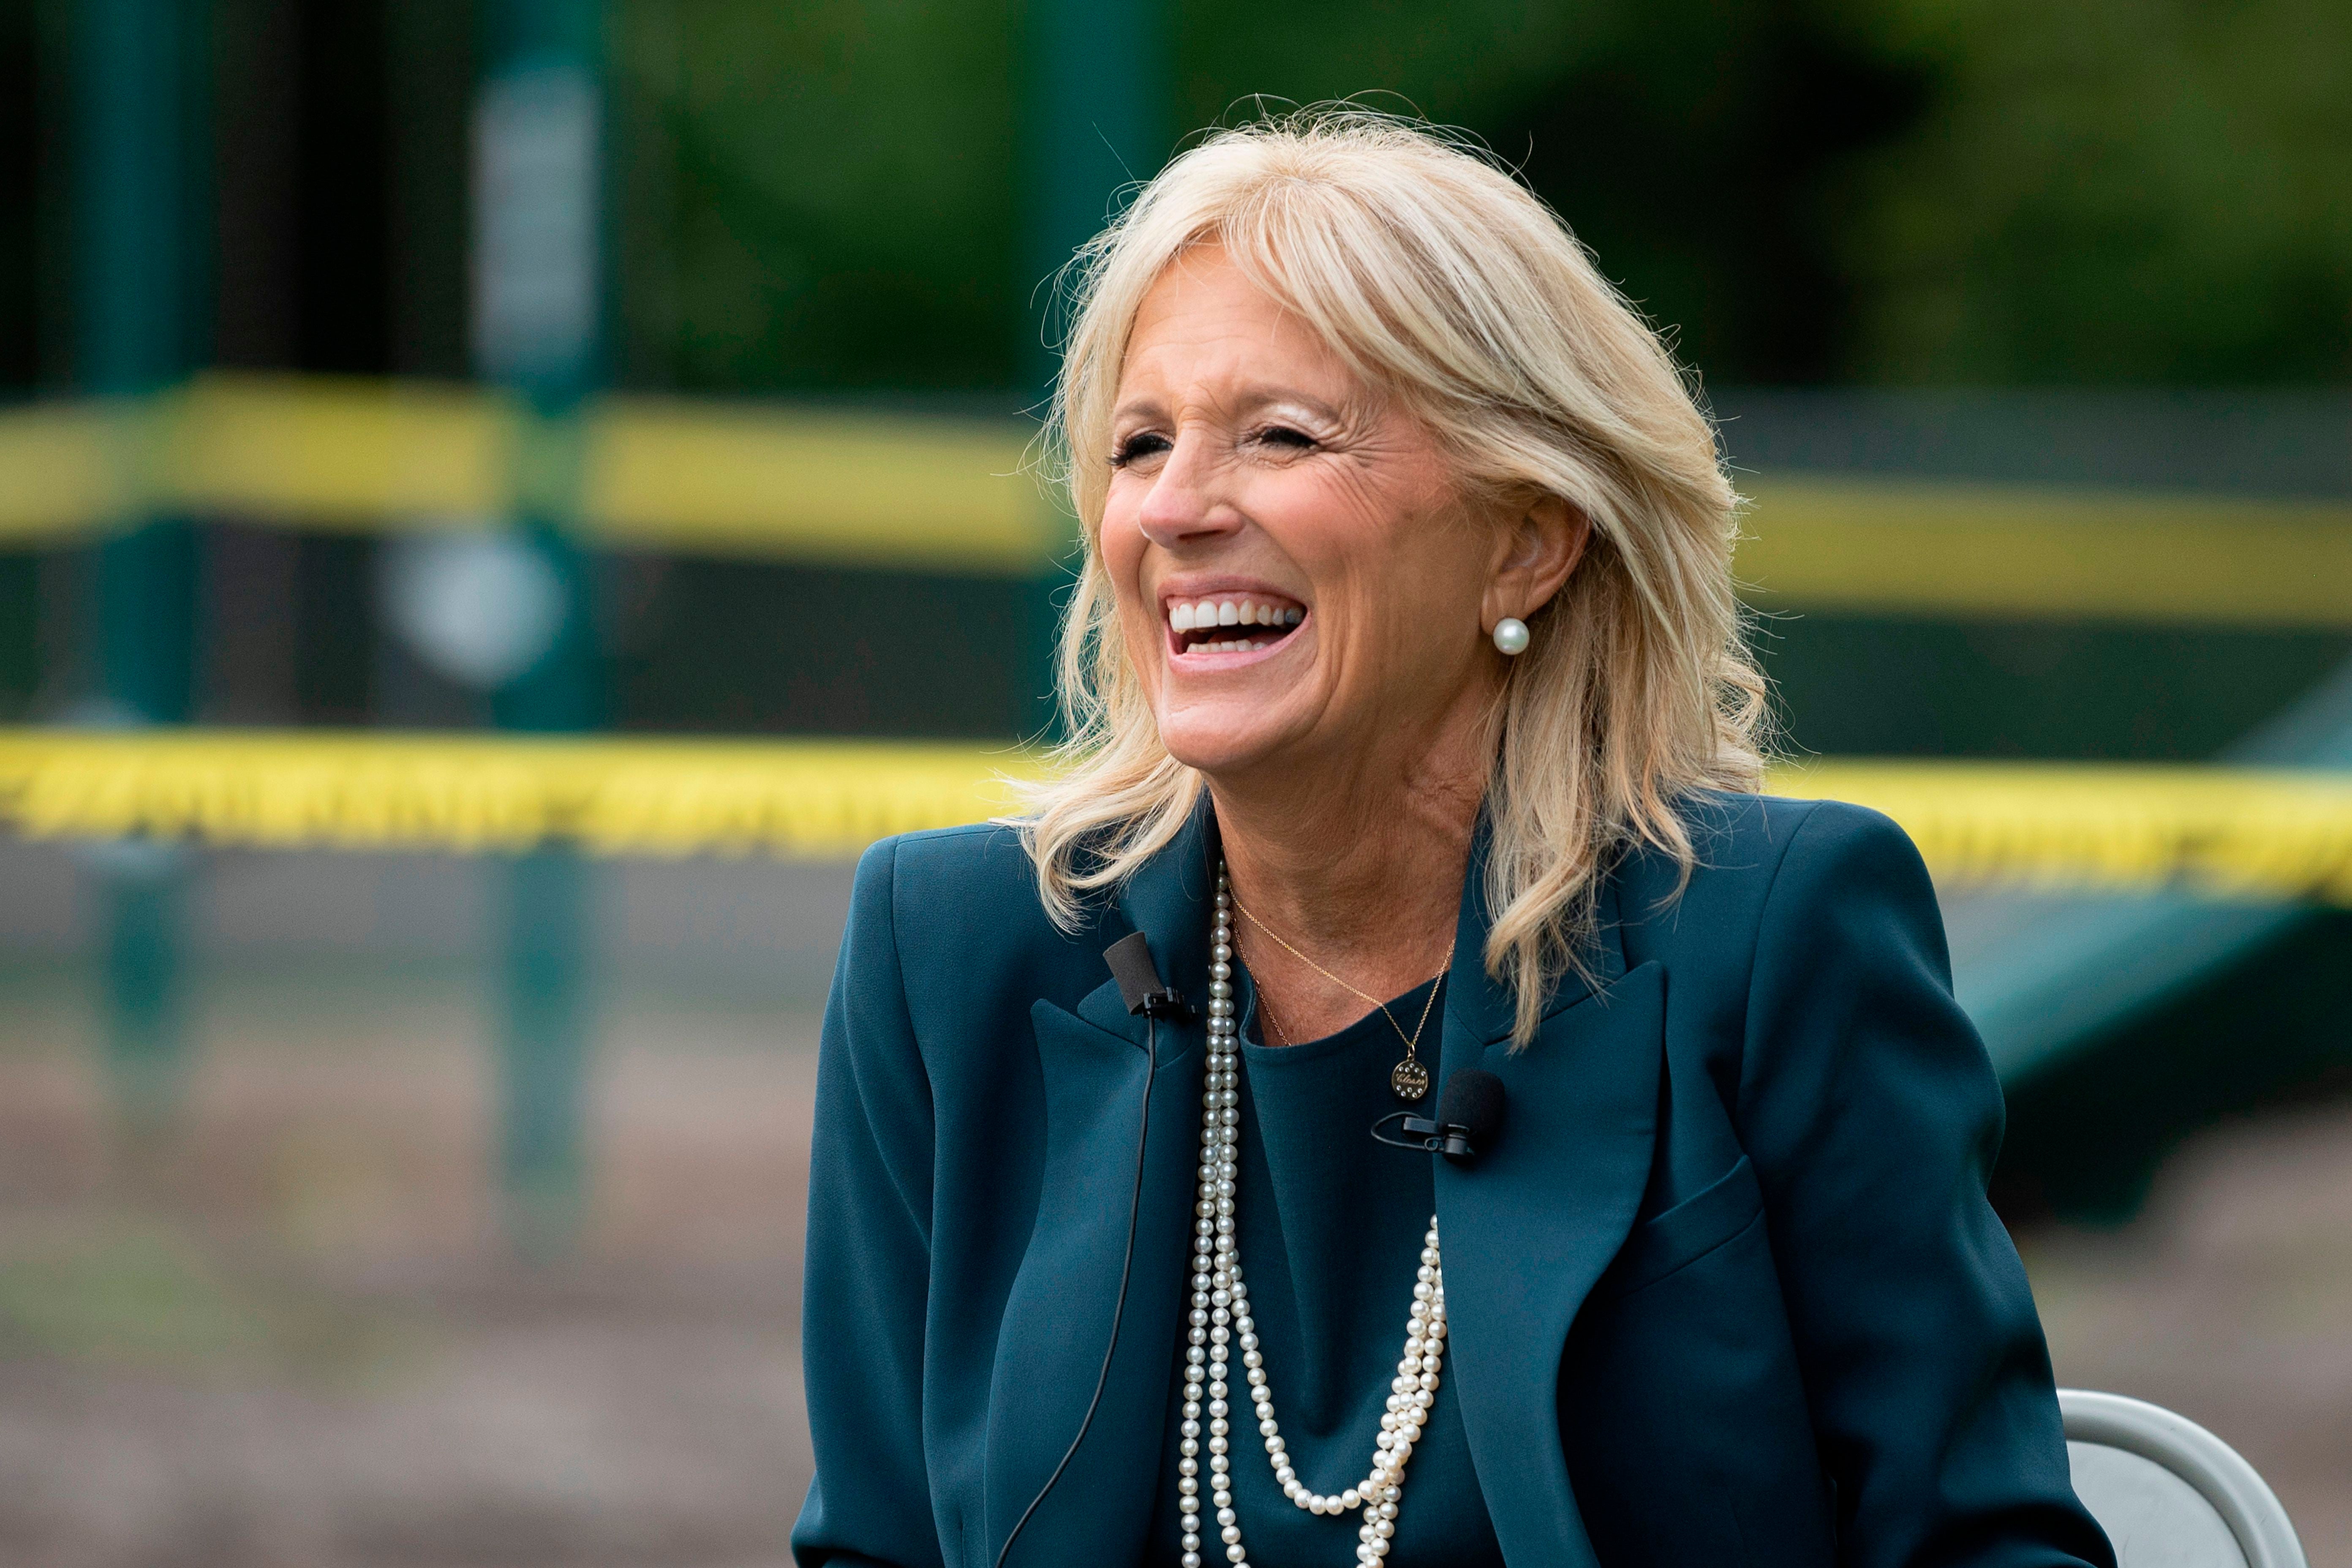 File photo: Jill Biden, the wife of Democratic presidential candidate Joe Biden, speaks during a Back to School Tour at Shortlidge Academy in Wilmington, Delaware, on 1 September, 2020